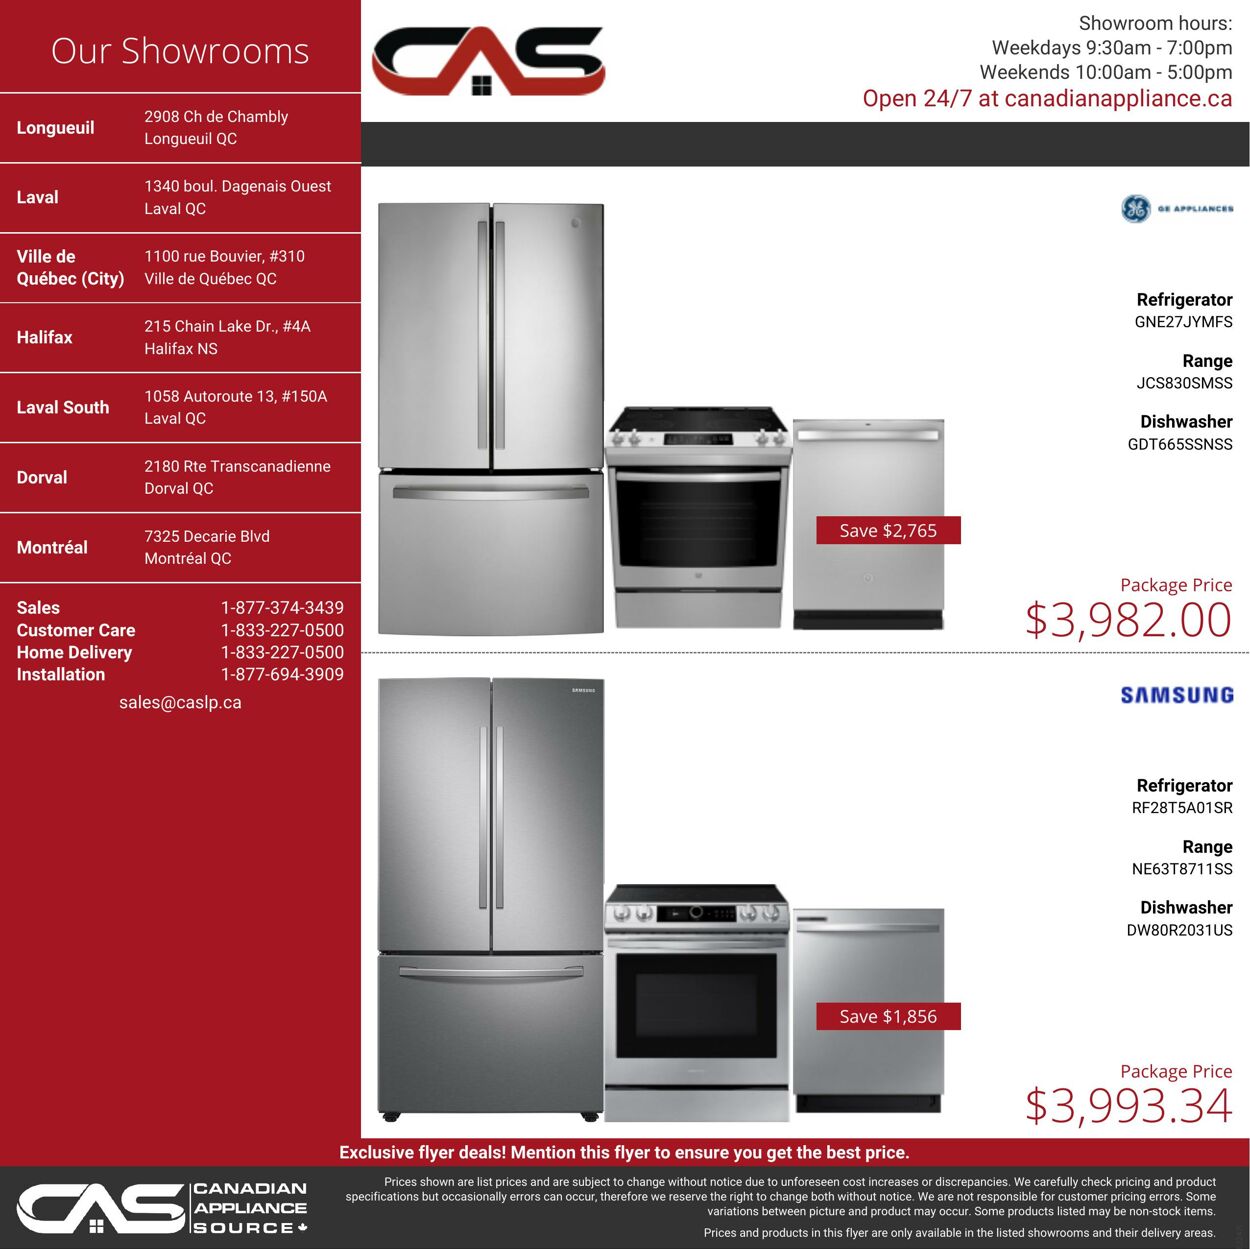 Circulaire Canadian Appliance Source 24.11.2022 - 30.11.2022